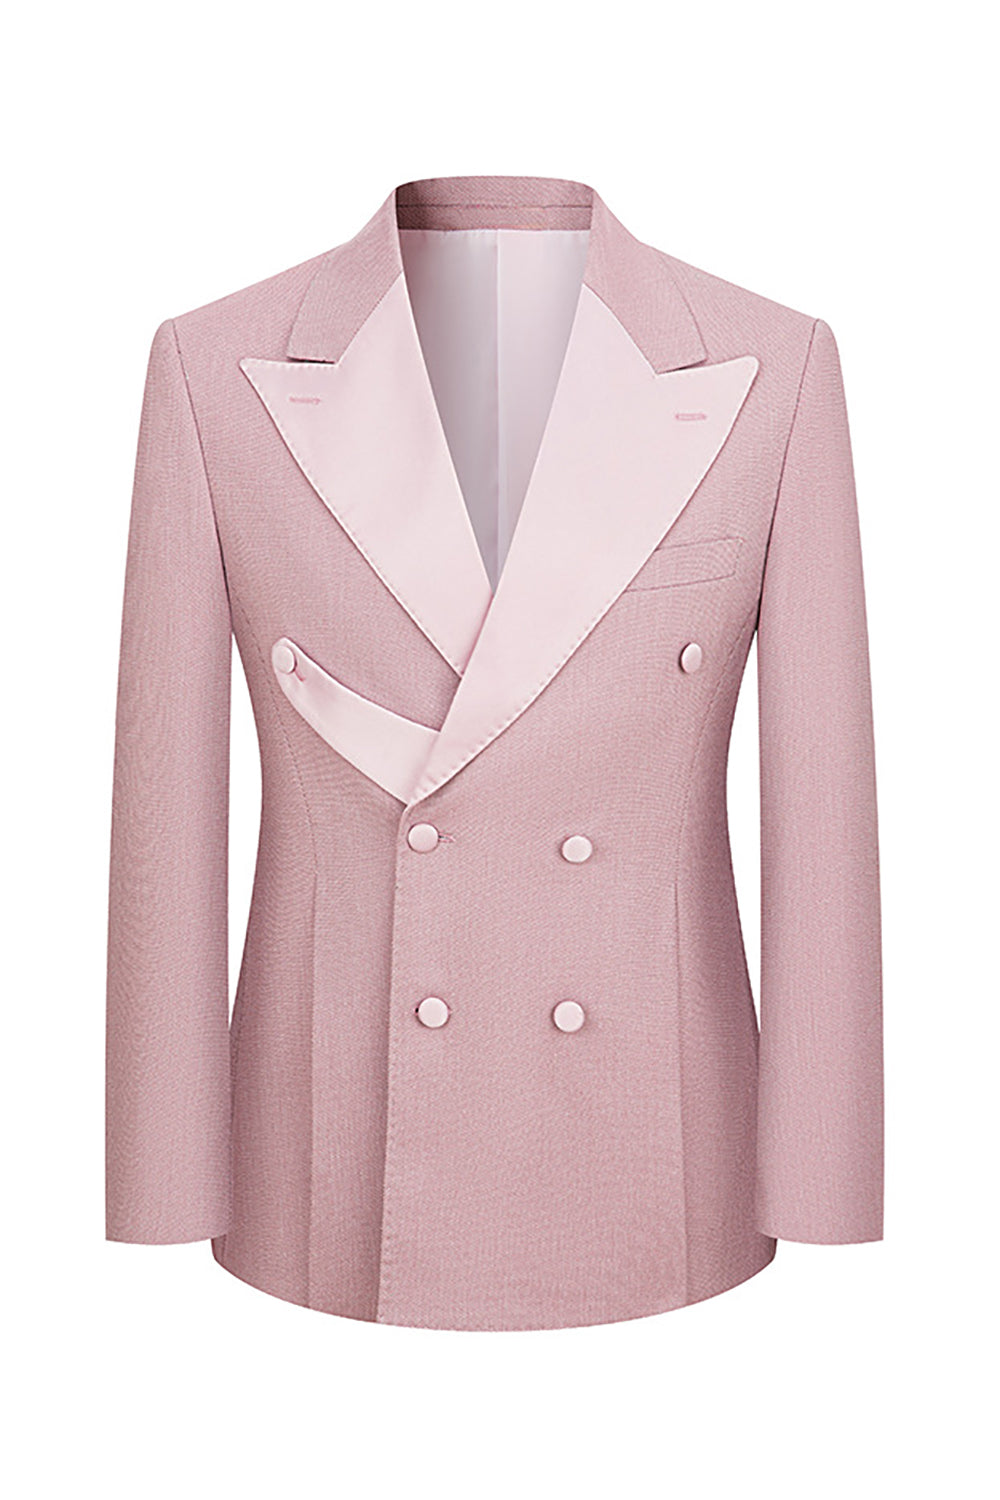 Light Pink 2 Piece Double Breasted Men Suits